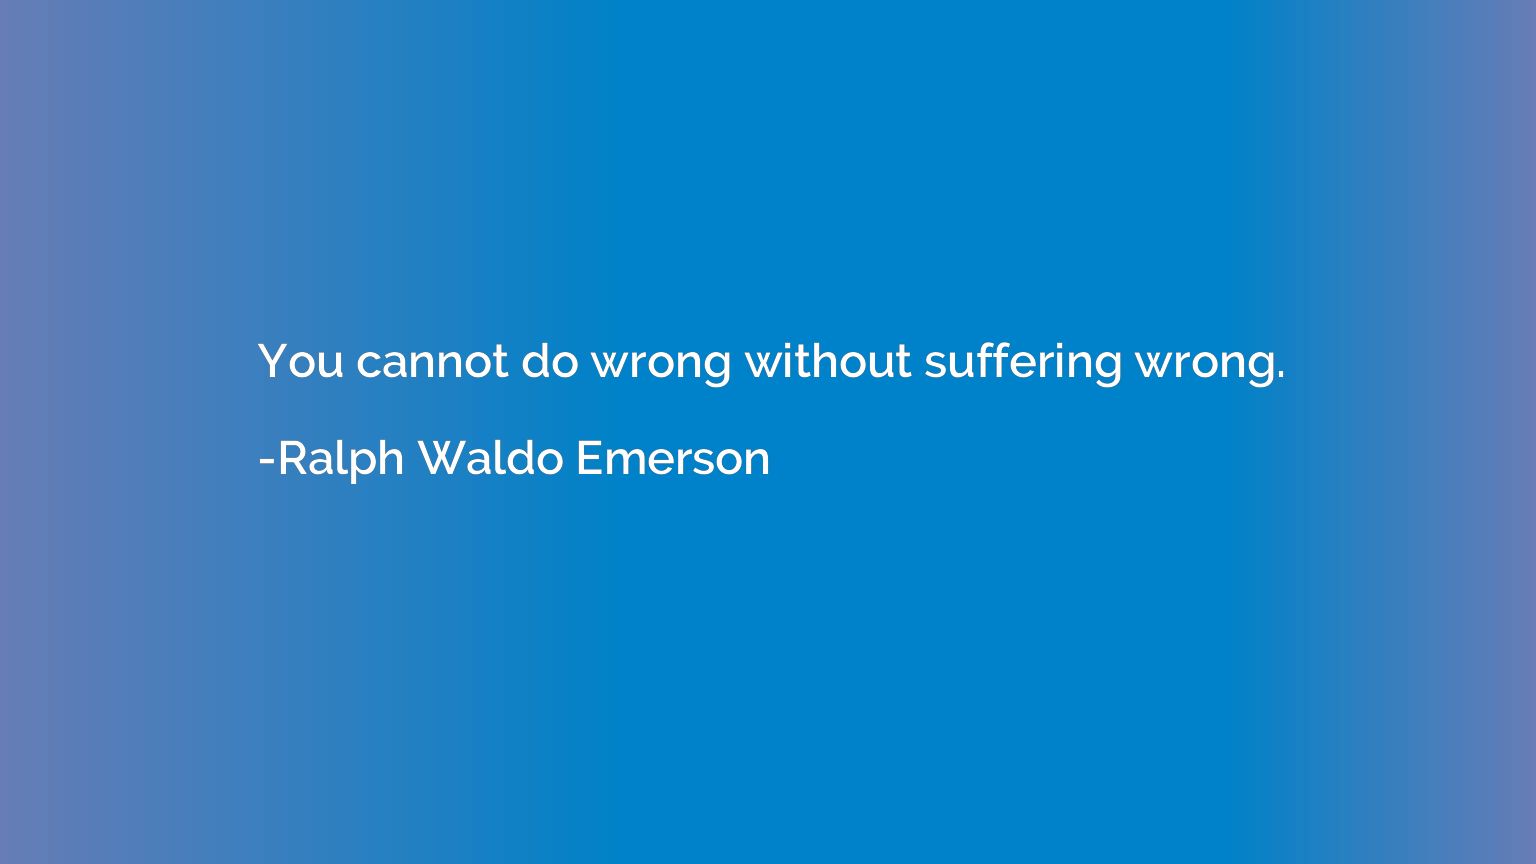 You cannot do wrong without suffering wrong.